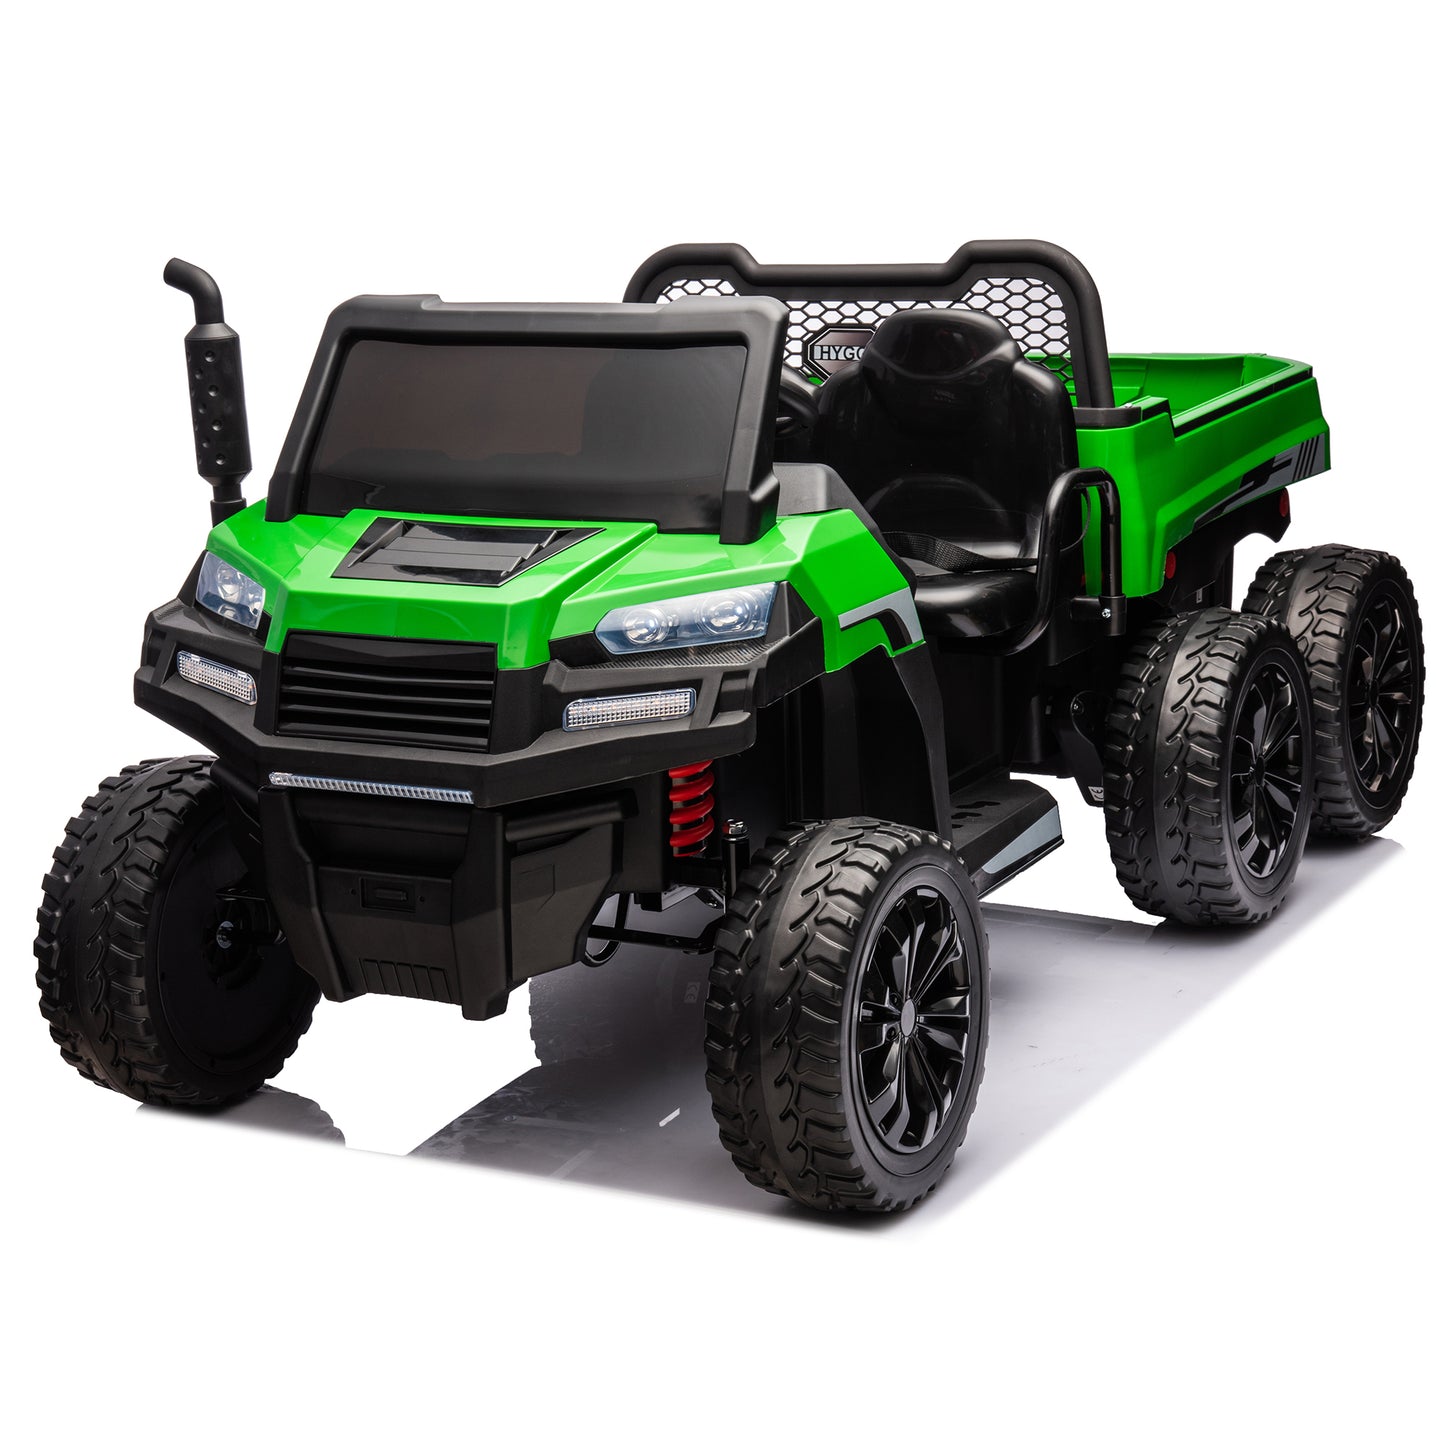 24V 2-Seater UTV-XXL Ride On Truck with Dump Bed for kid,Ride On 4WD UTV with 6 Wheels,Foam Tires, Suitable for Off-Roading,remote control,Three-Point Safety Harness